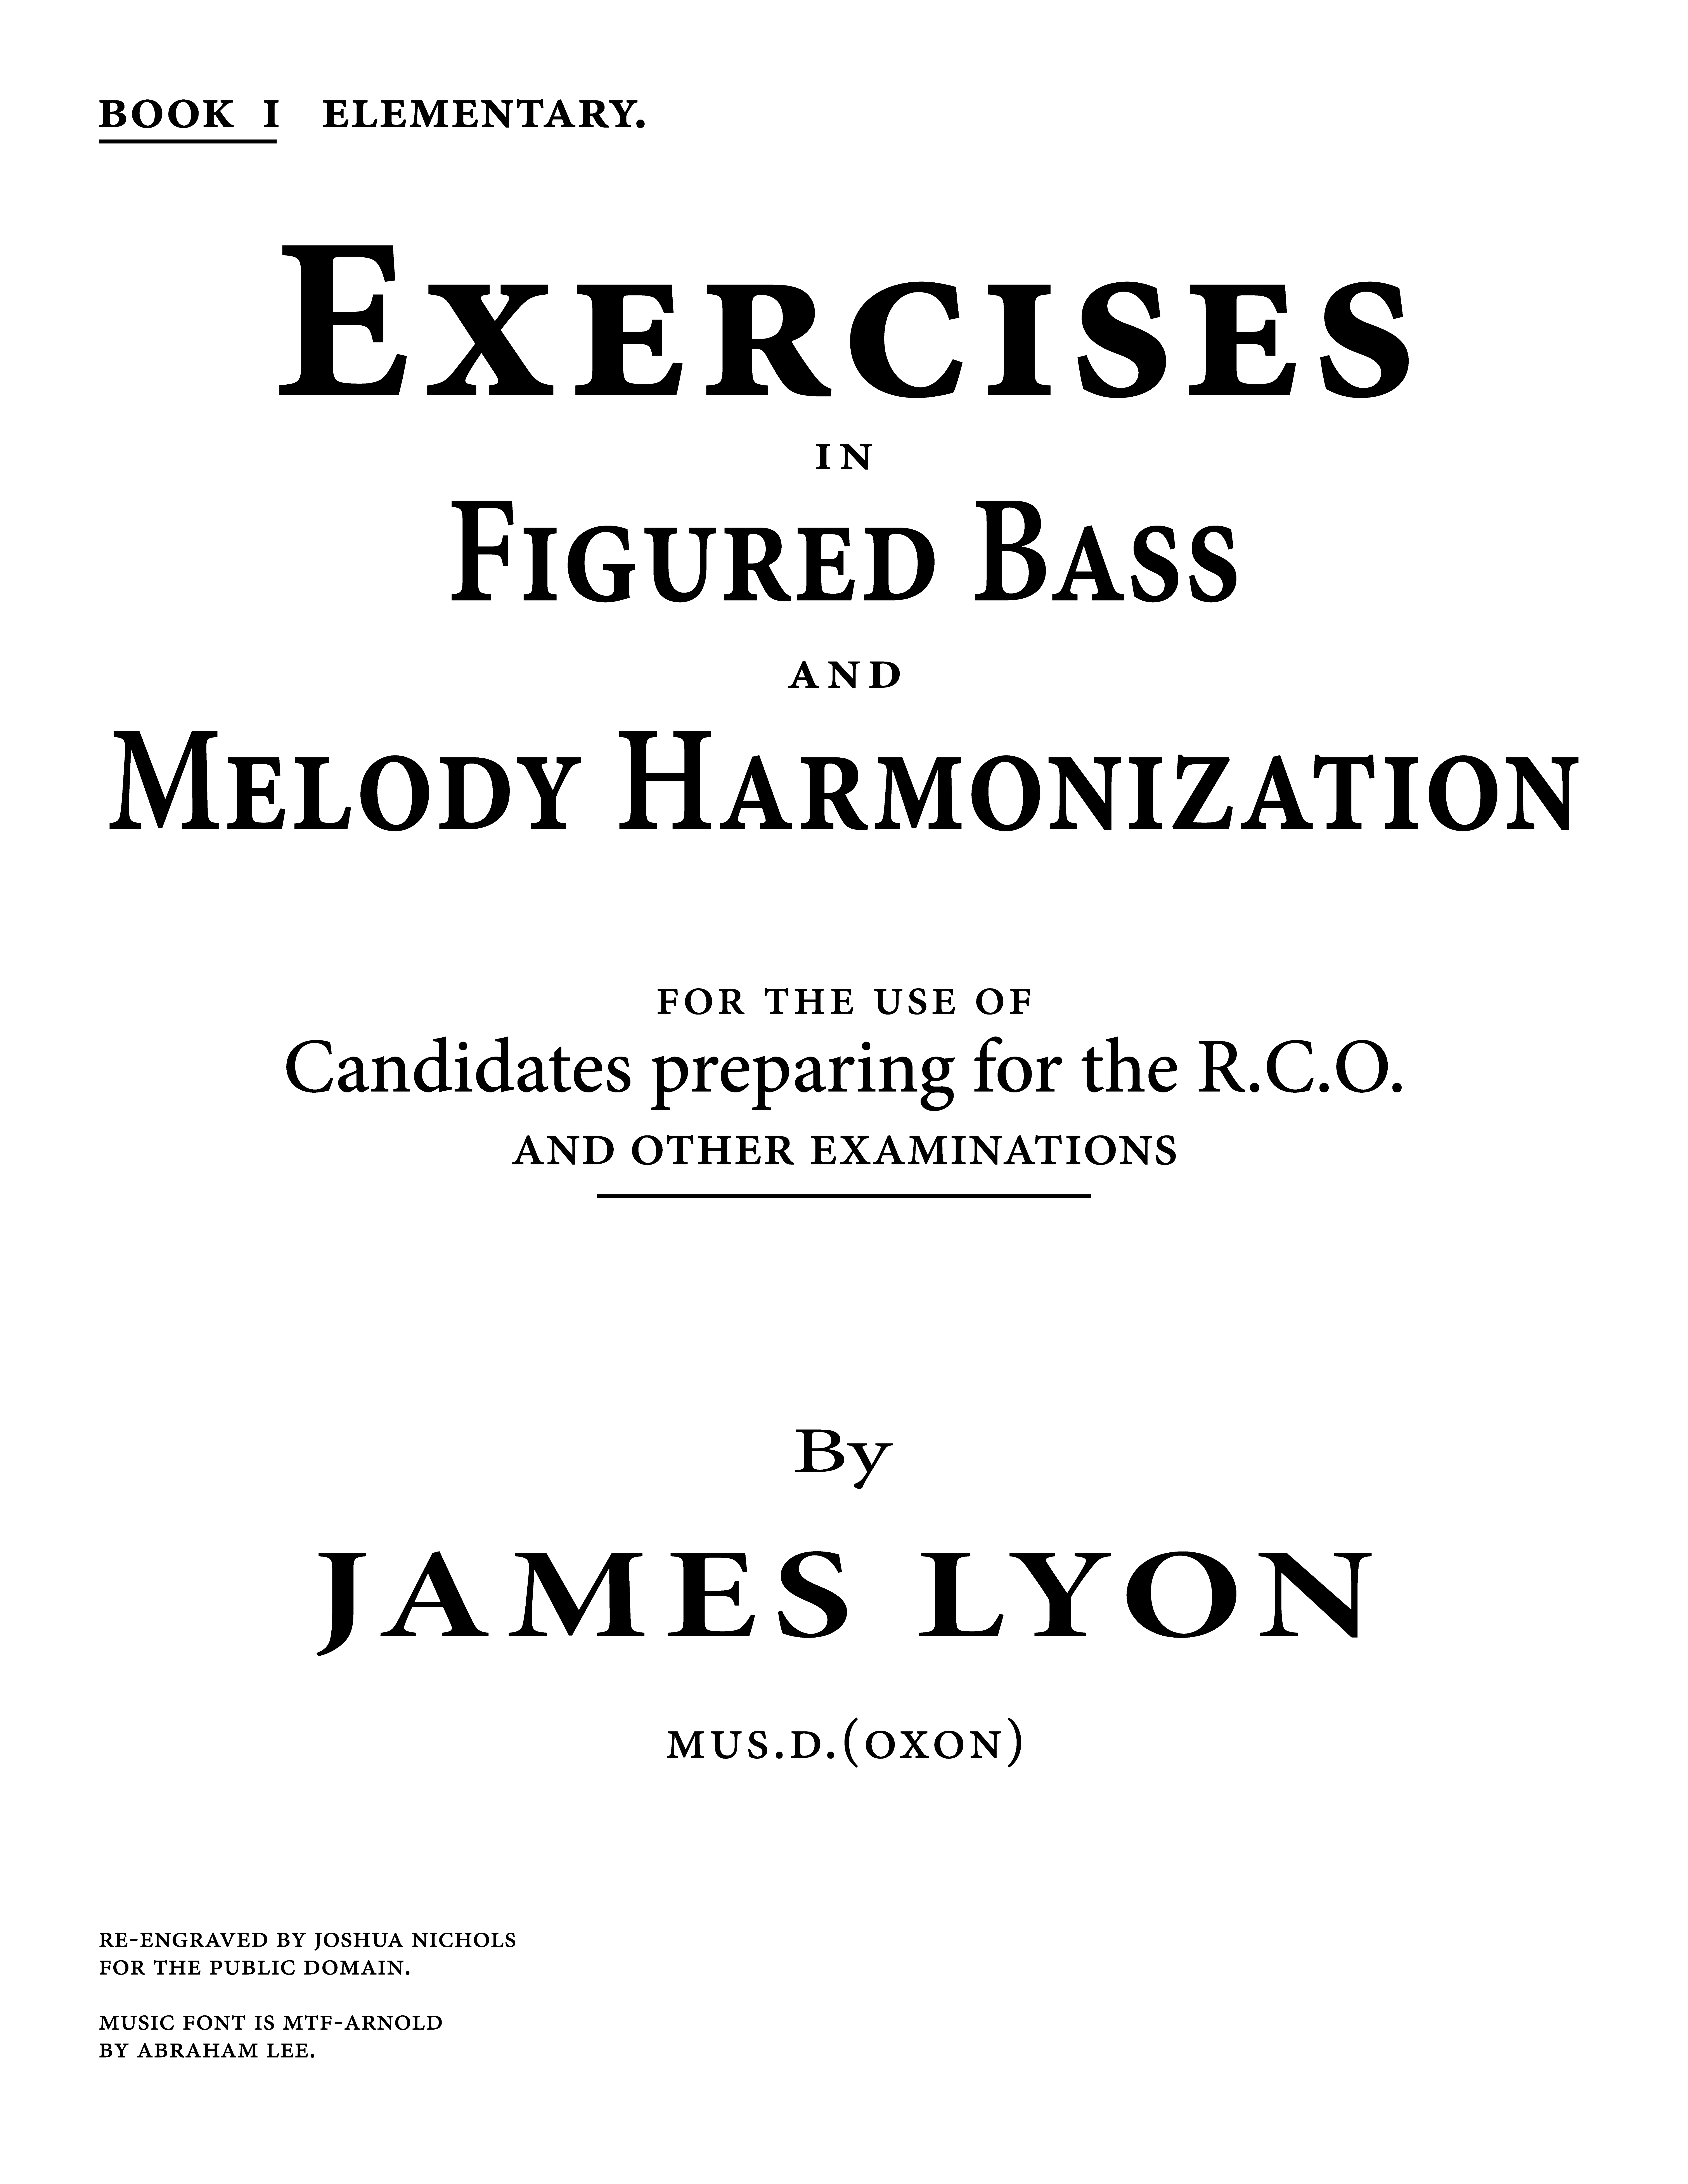 exercises in figured bass cover design.png